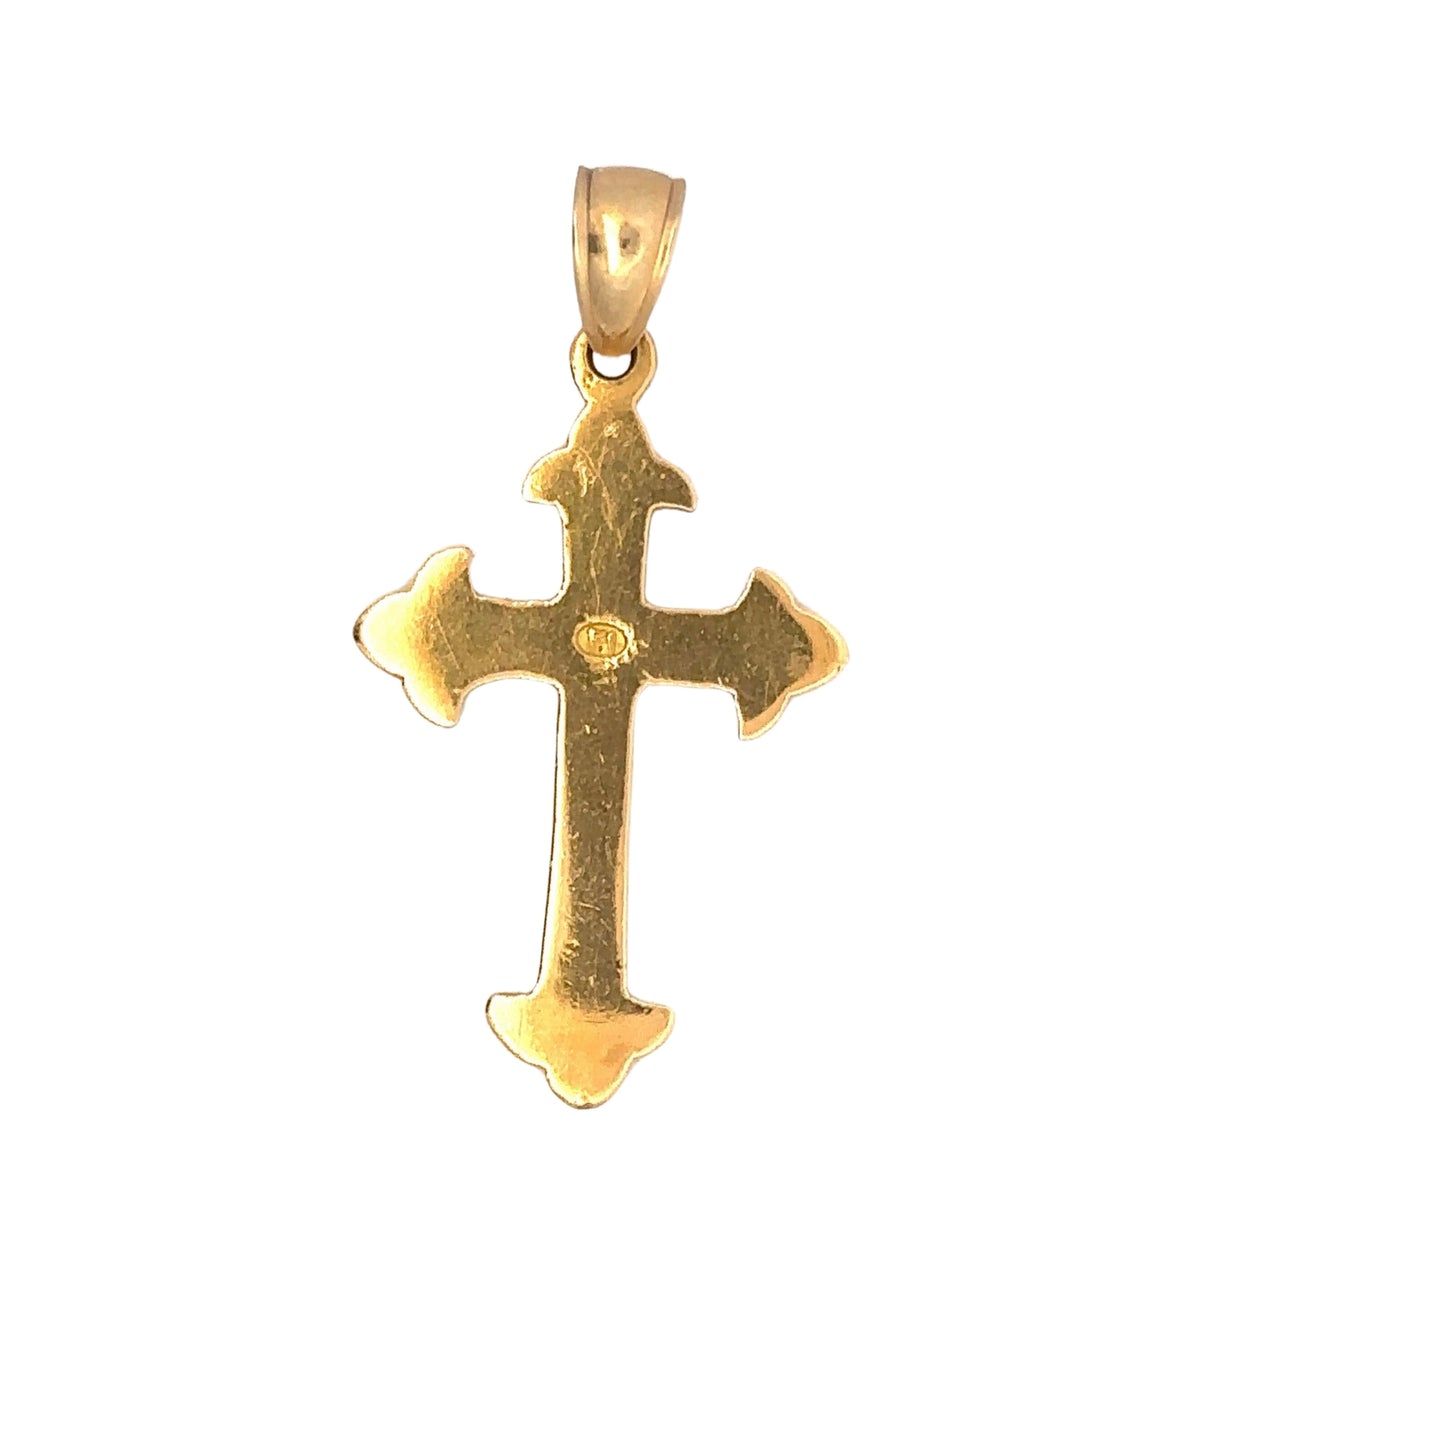 Back of yellow gold cross pendant with many scratches